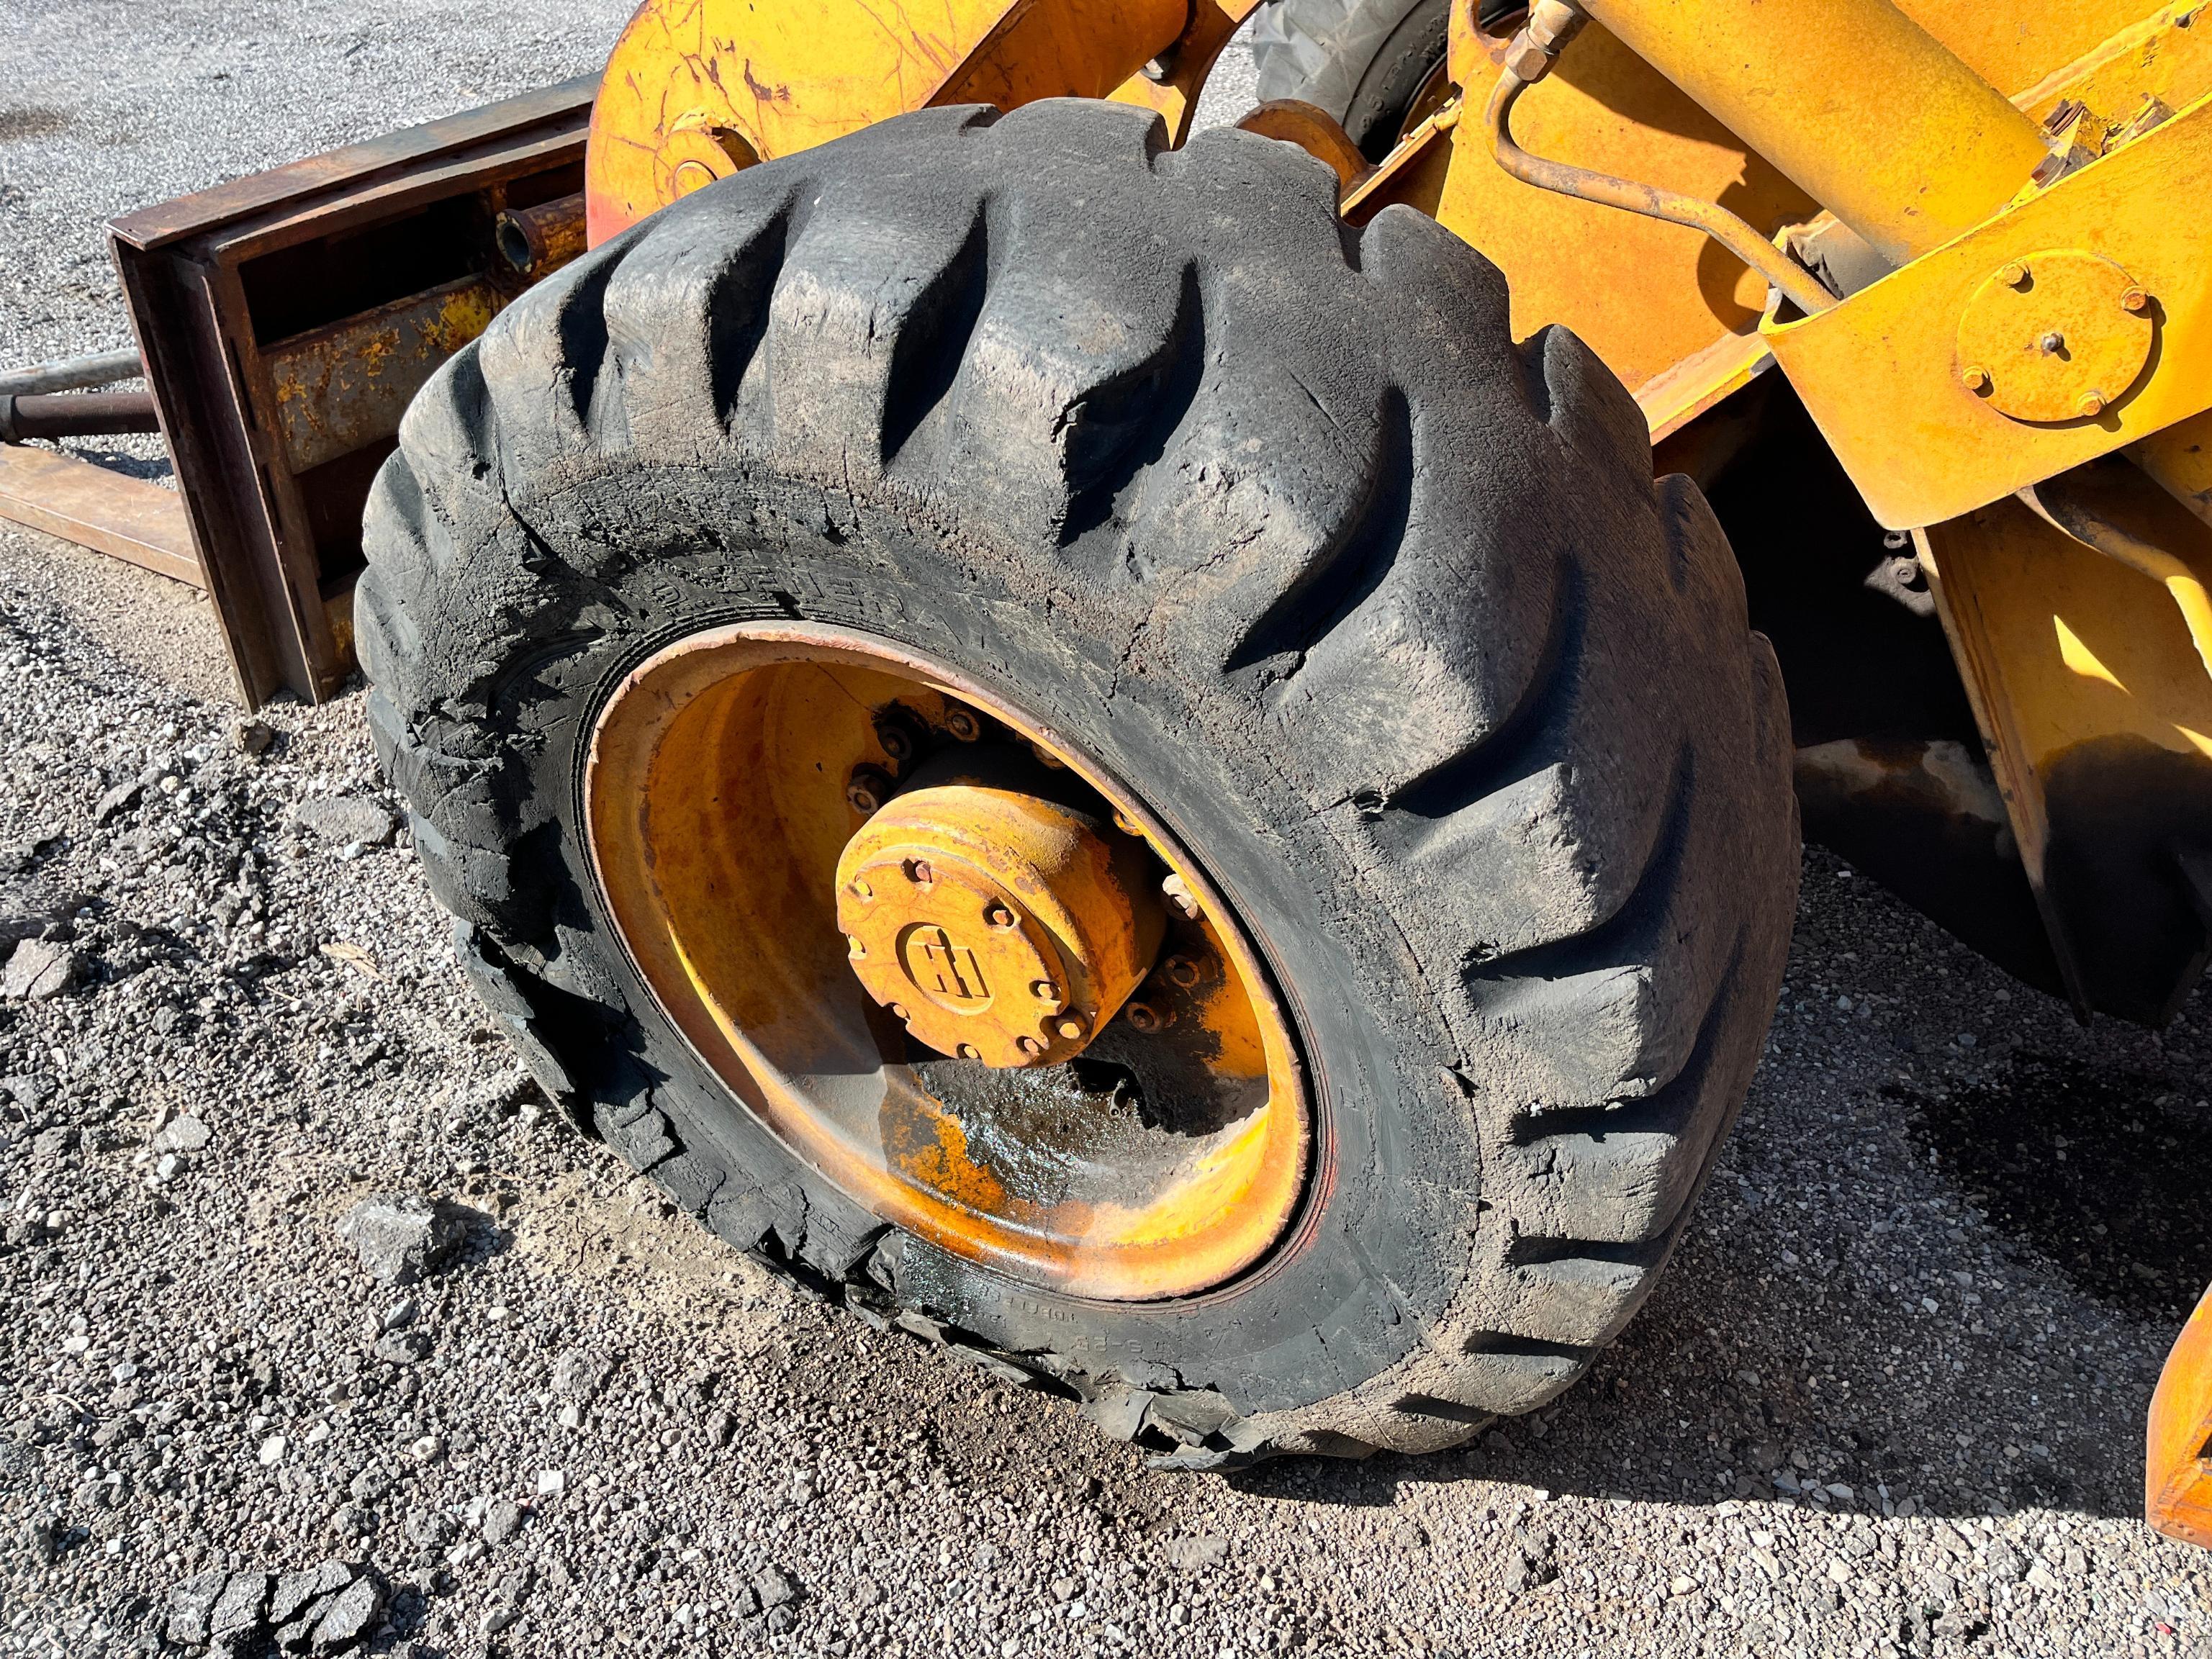 IH PAYLOADER H60 RUBBER TIRED LOADER powered by diesel engine, equipped with ECAB, 72in. Forks,